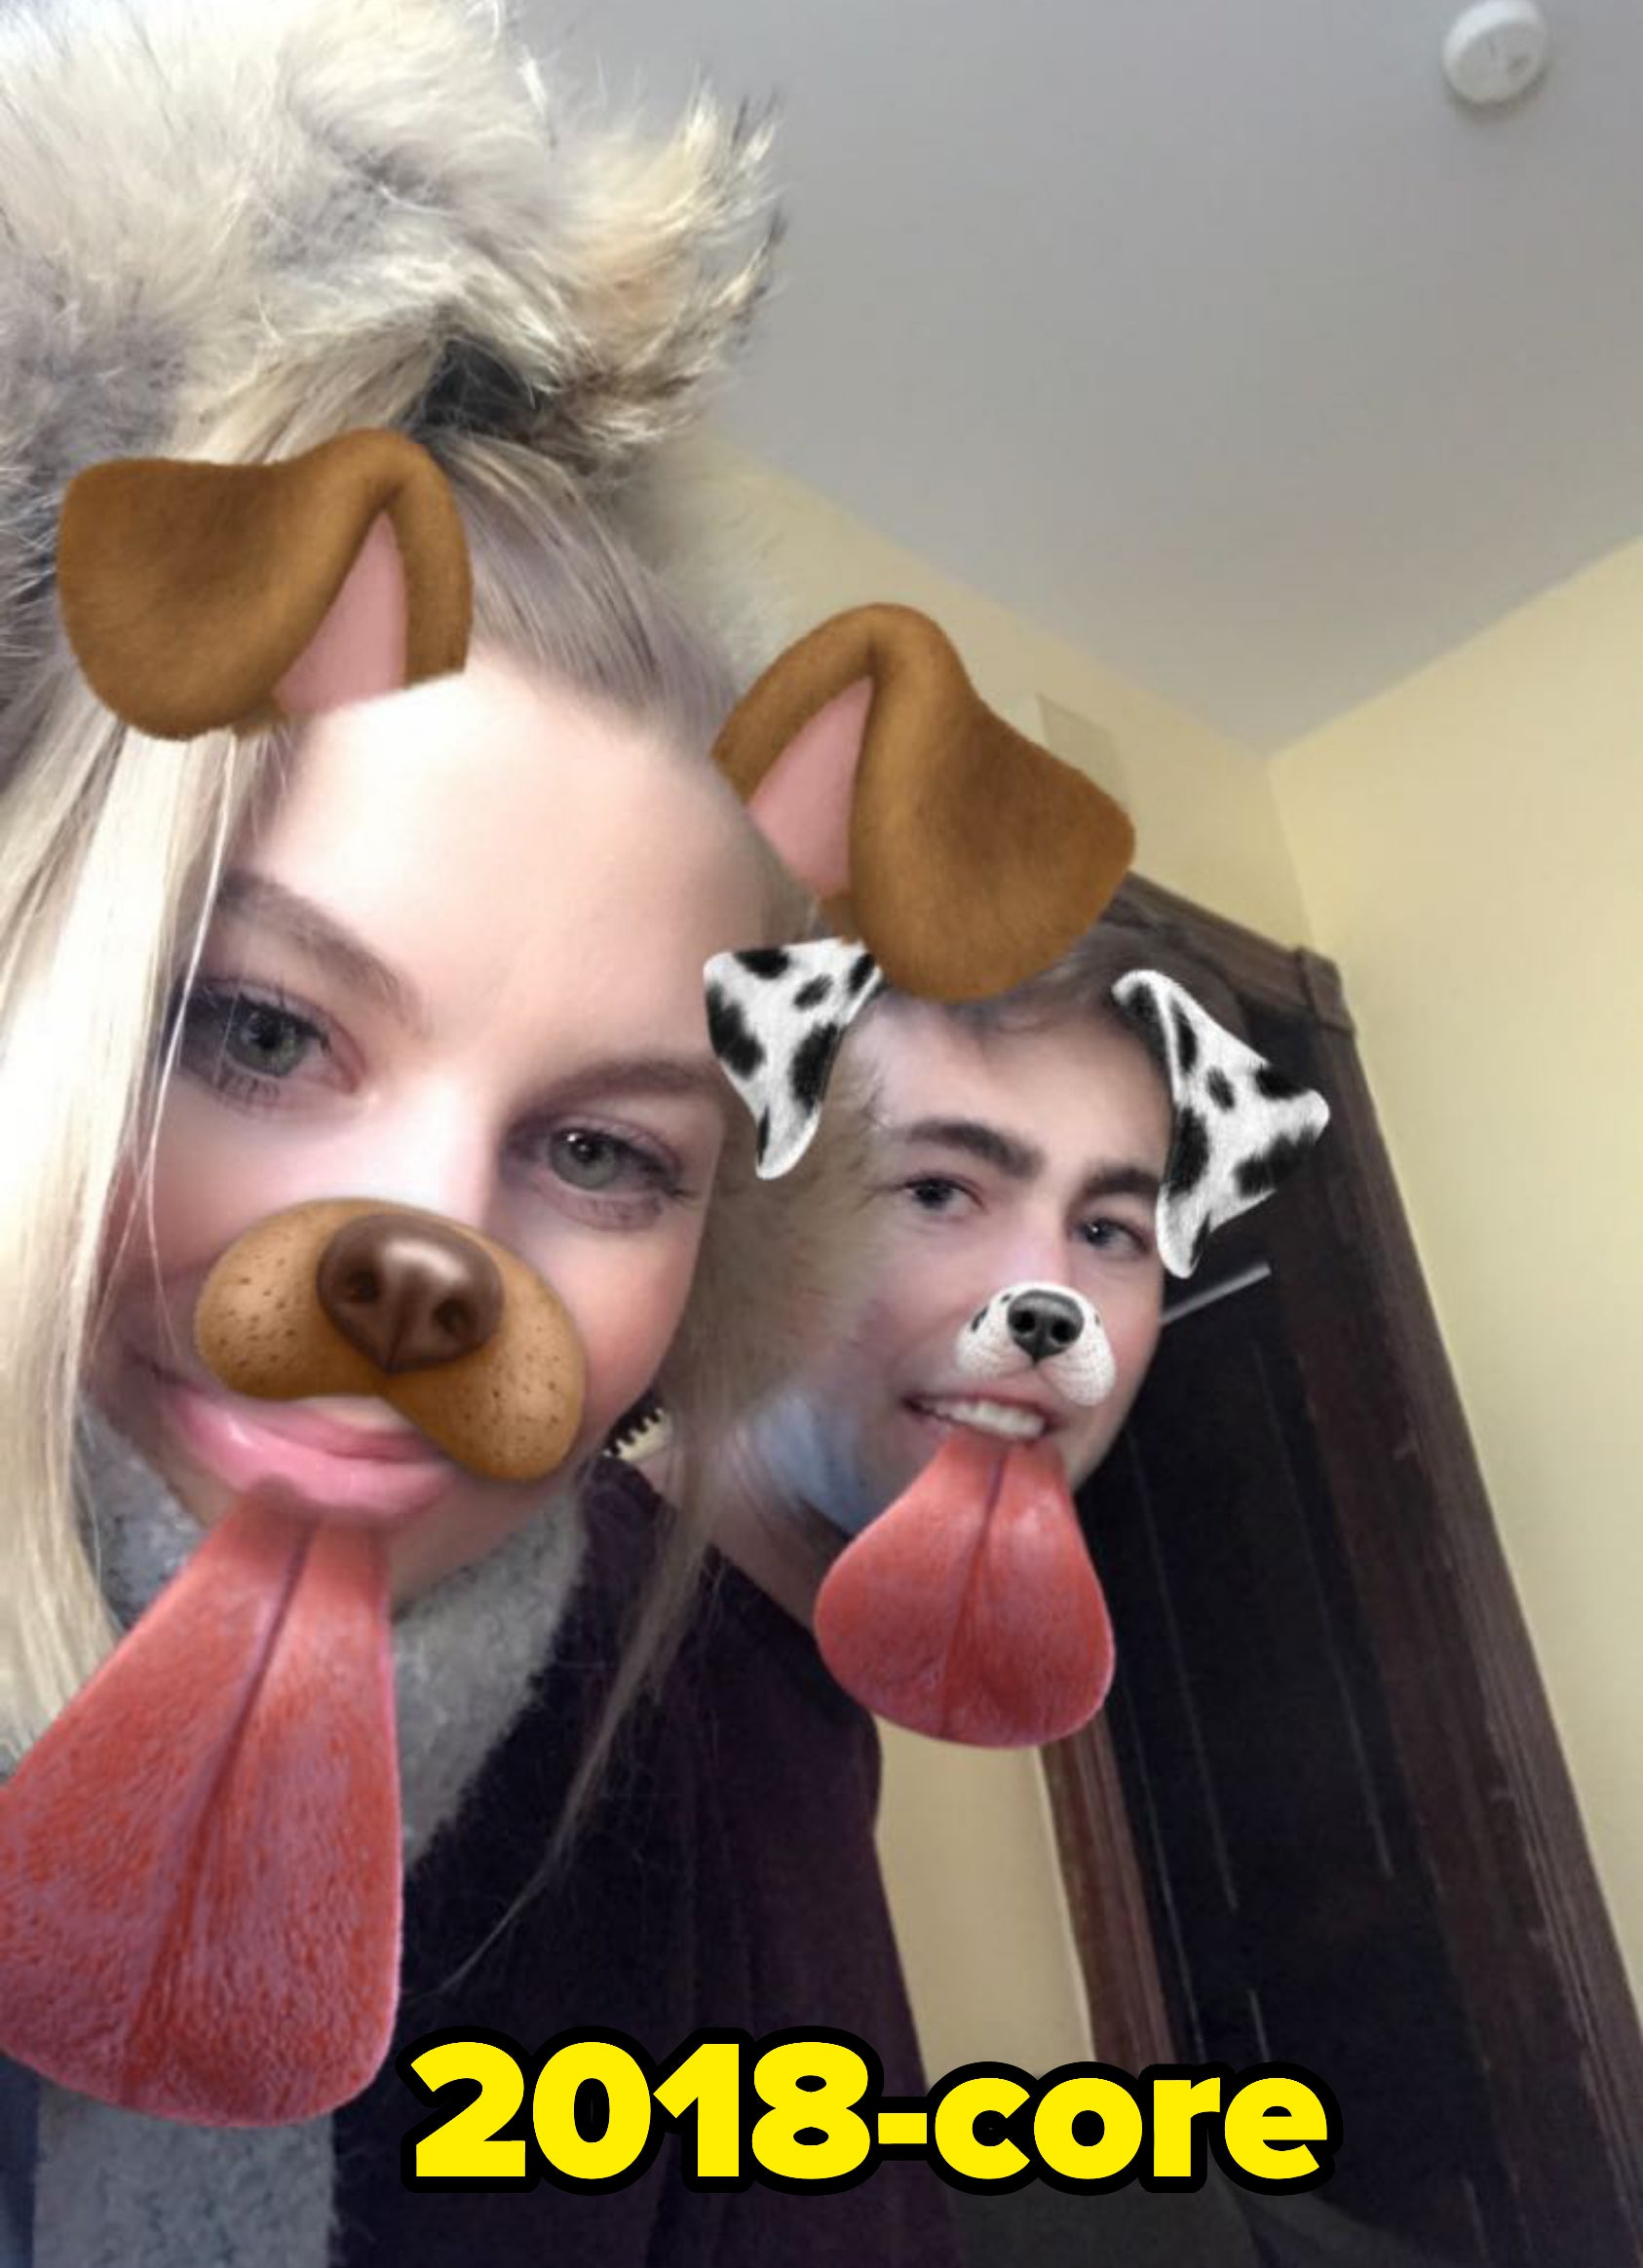 My boyfriend and me with the Snapchat dog filter on our faces in 2018